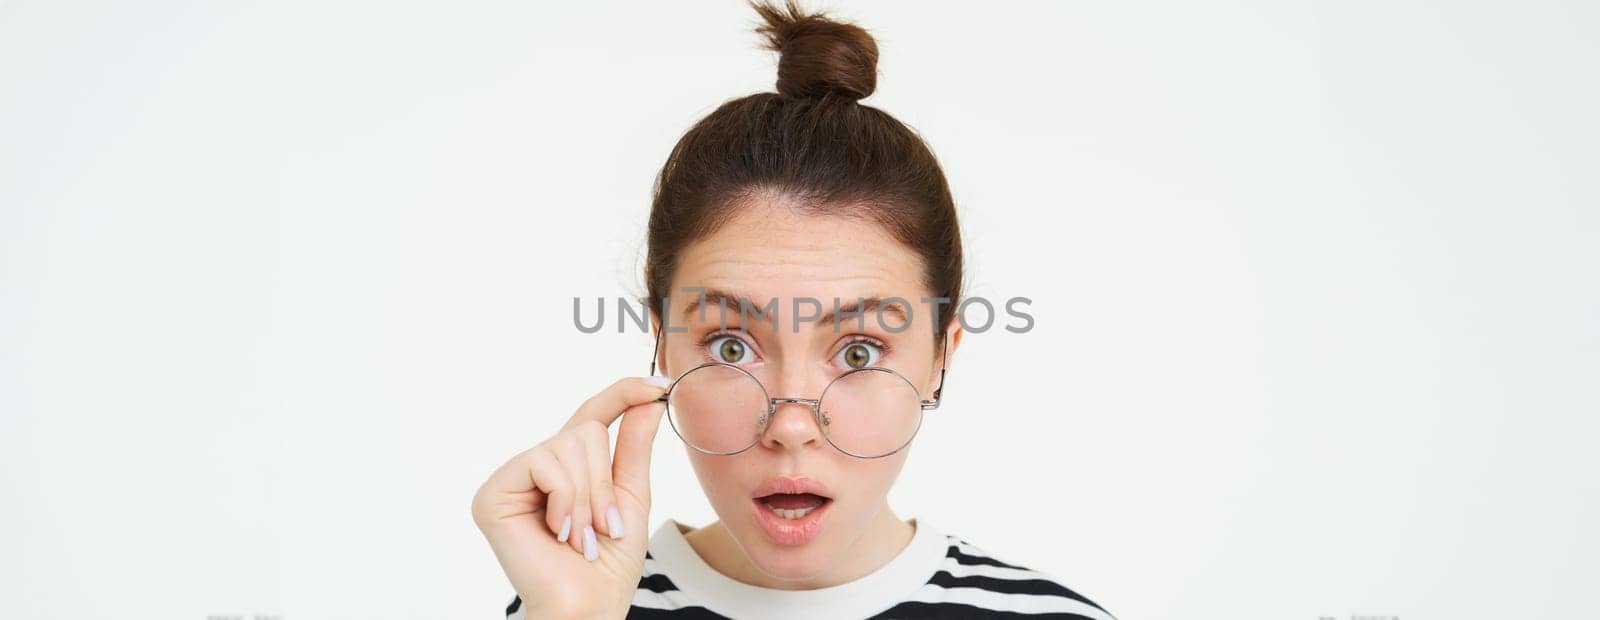 Image of woman in glasses, looks surprised, takes off eyewear, looks amazed, says wow, impressed by something, stands over white background.